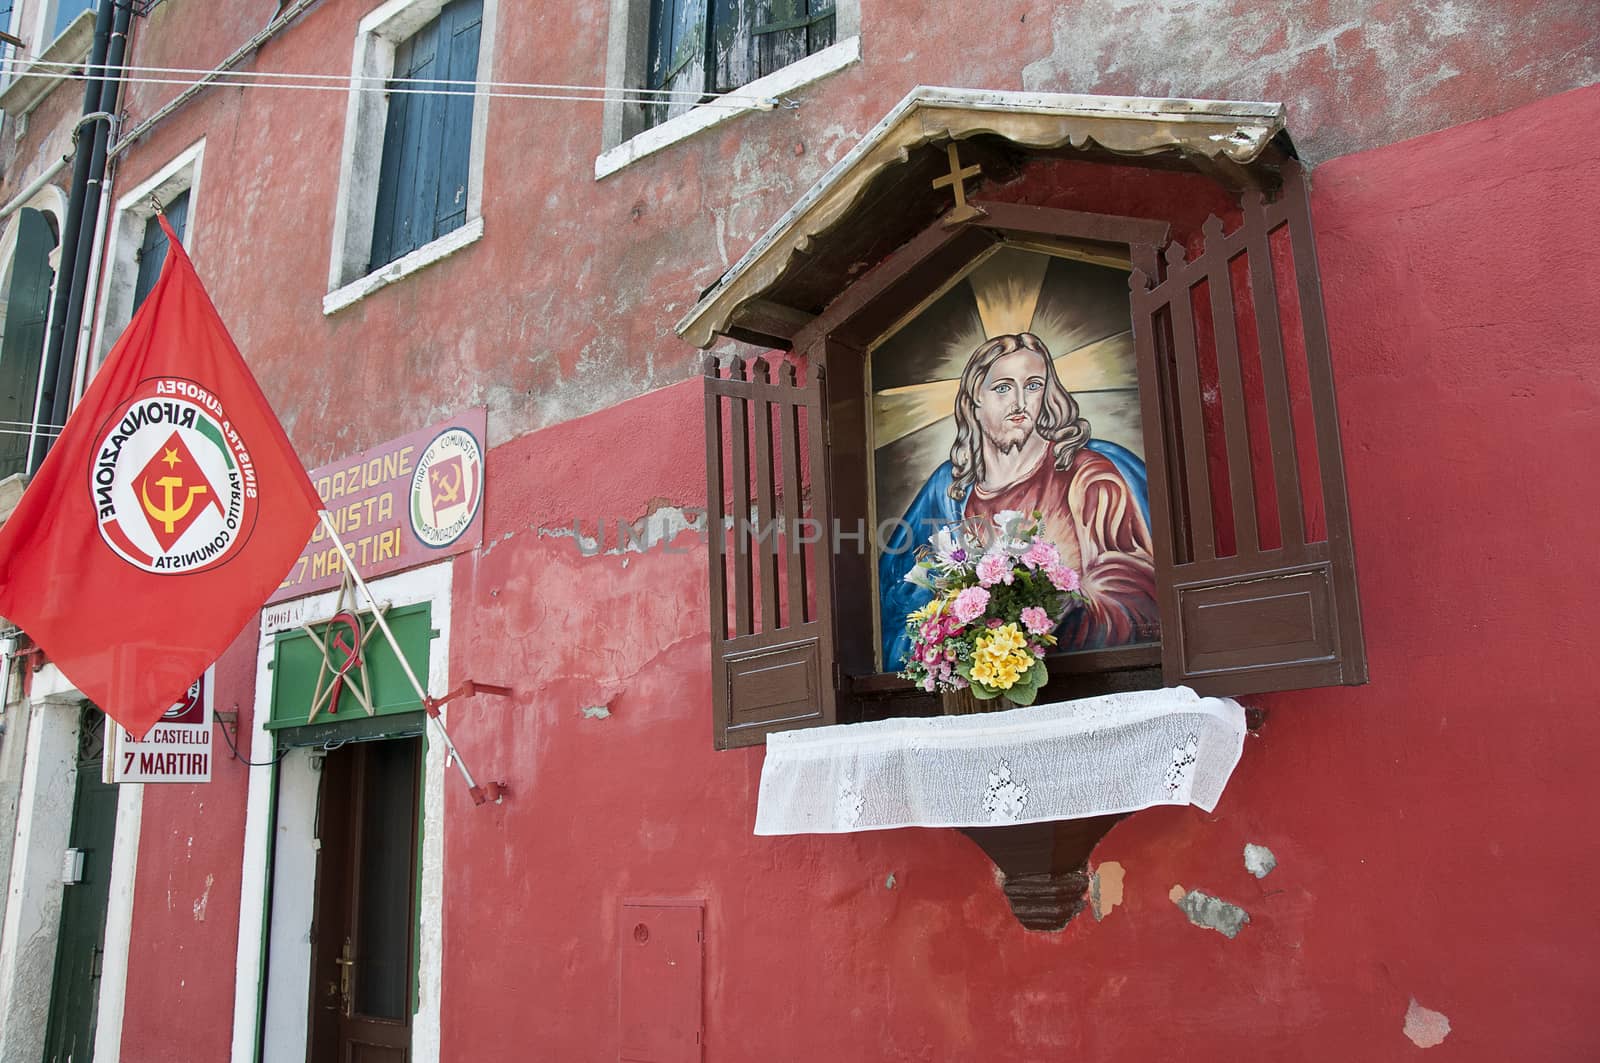 Headquarters of communist party and image of Jesus Christ, Venic by jalonsohu@gmail.com